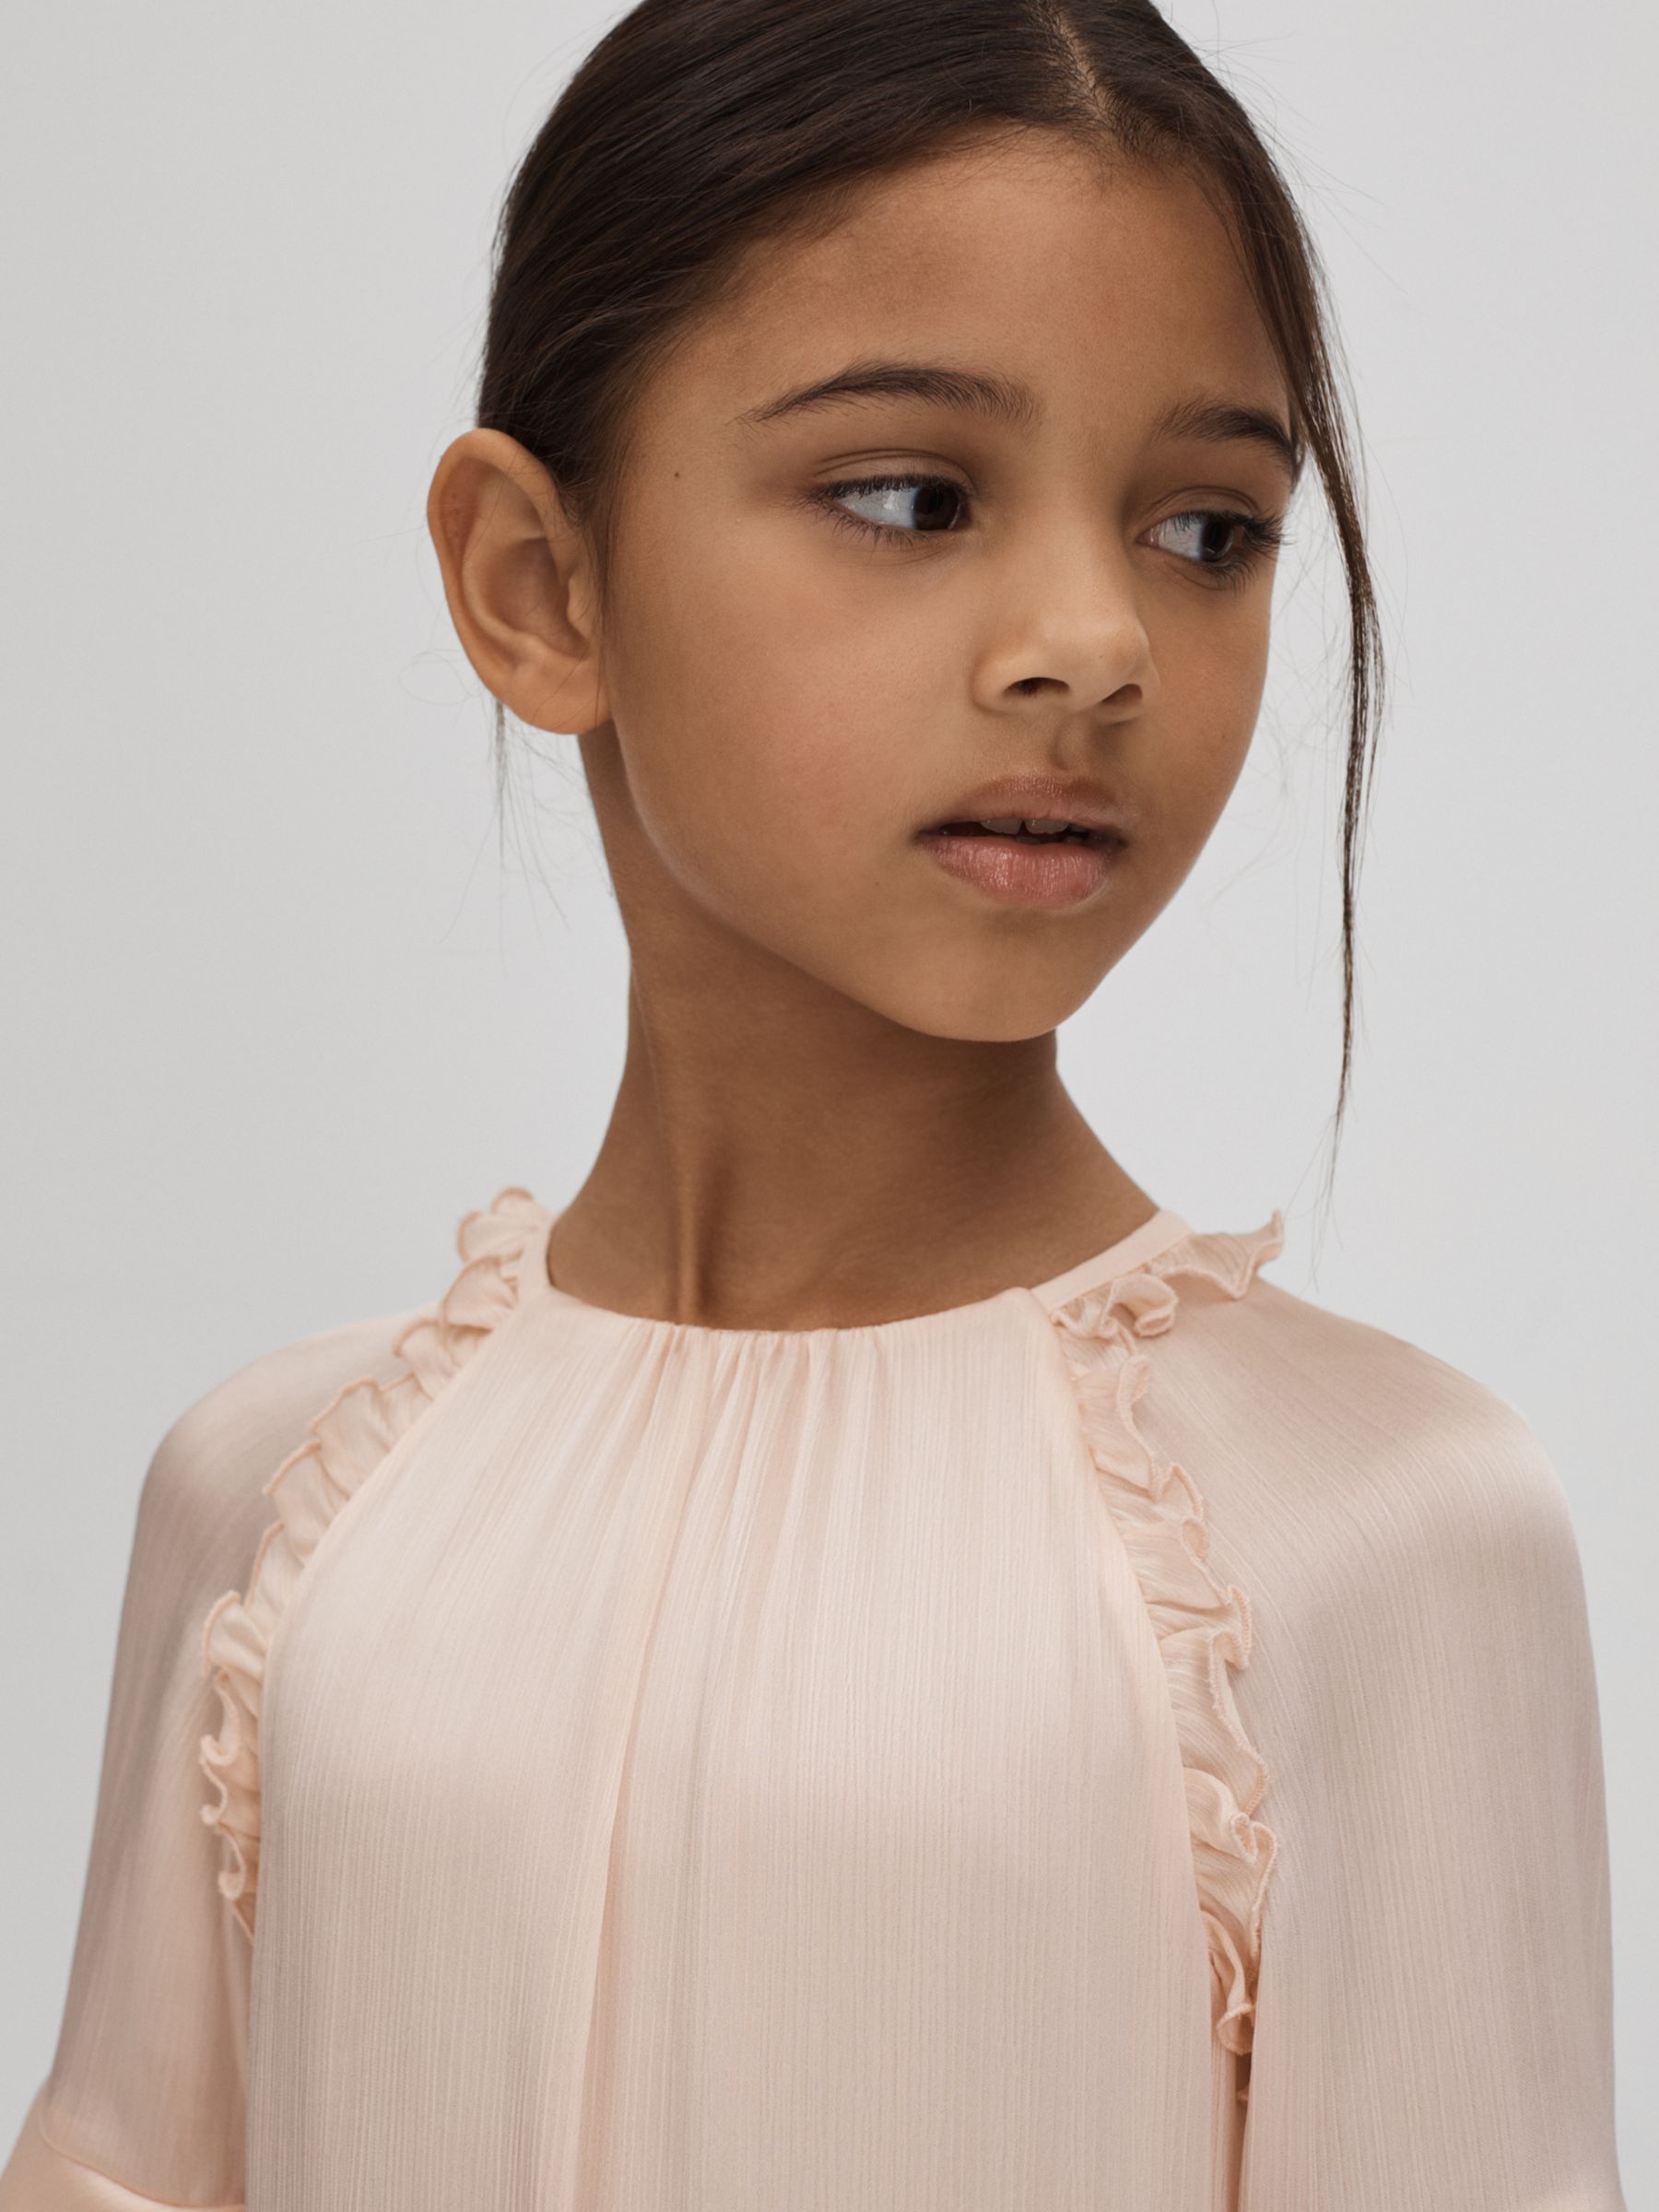 Reiss Kids' Polly Textured Satin Frilly Dress, Pink, 13-14 years